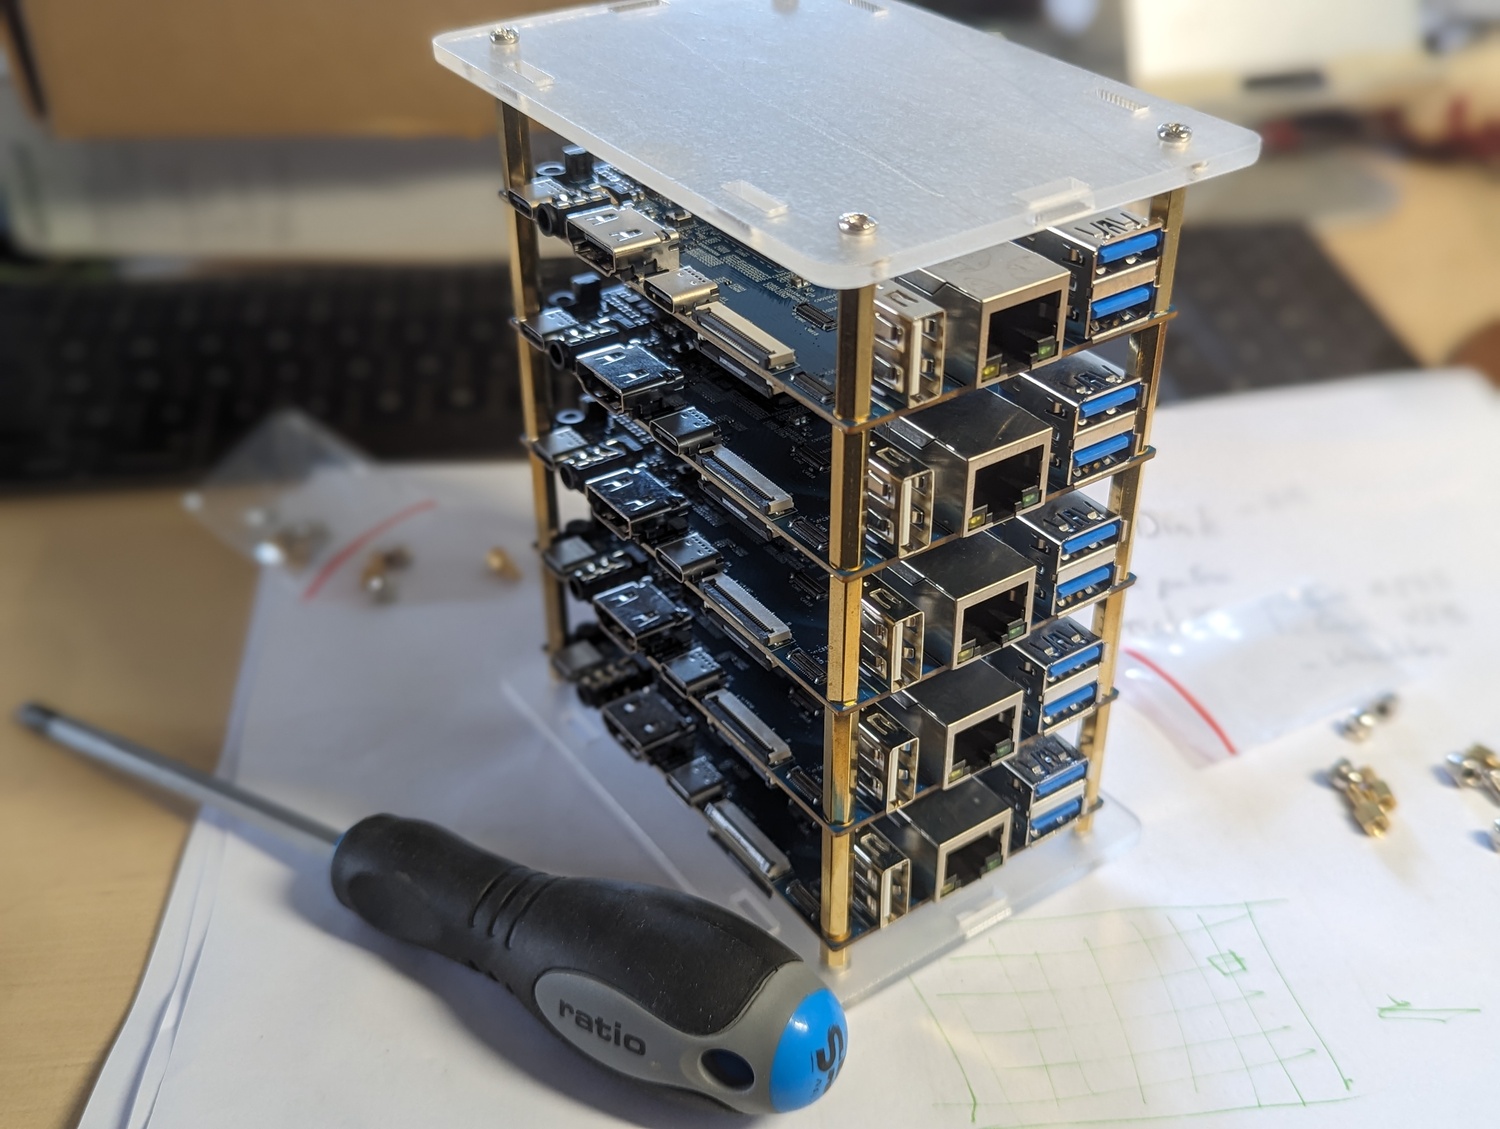 icon for the article: Orangepi 5 cluster